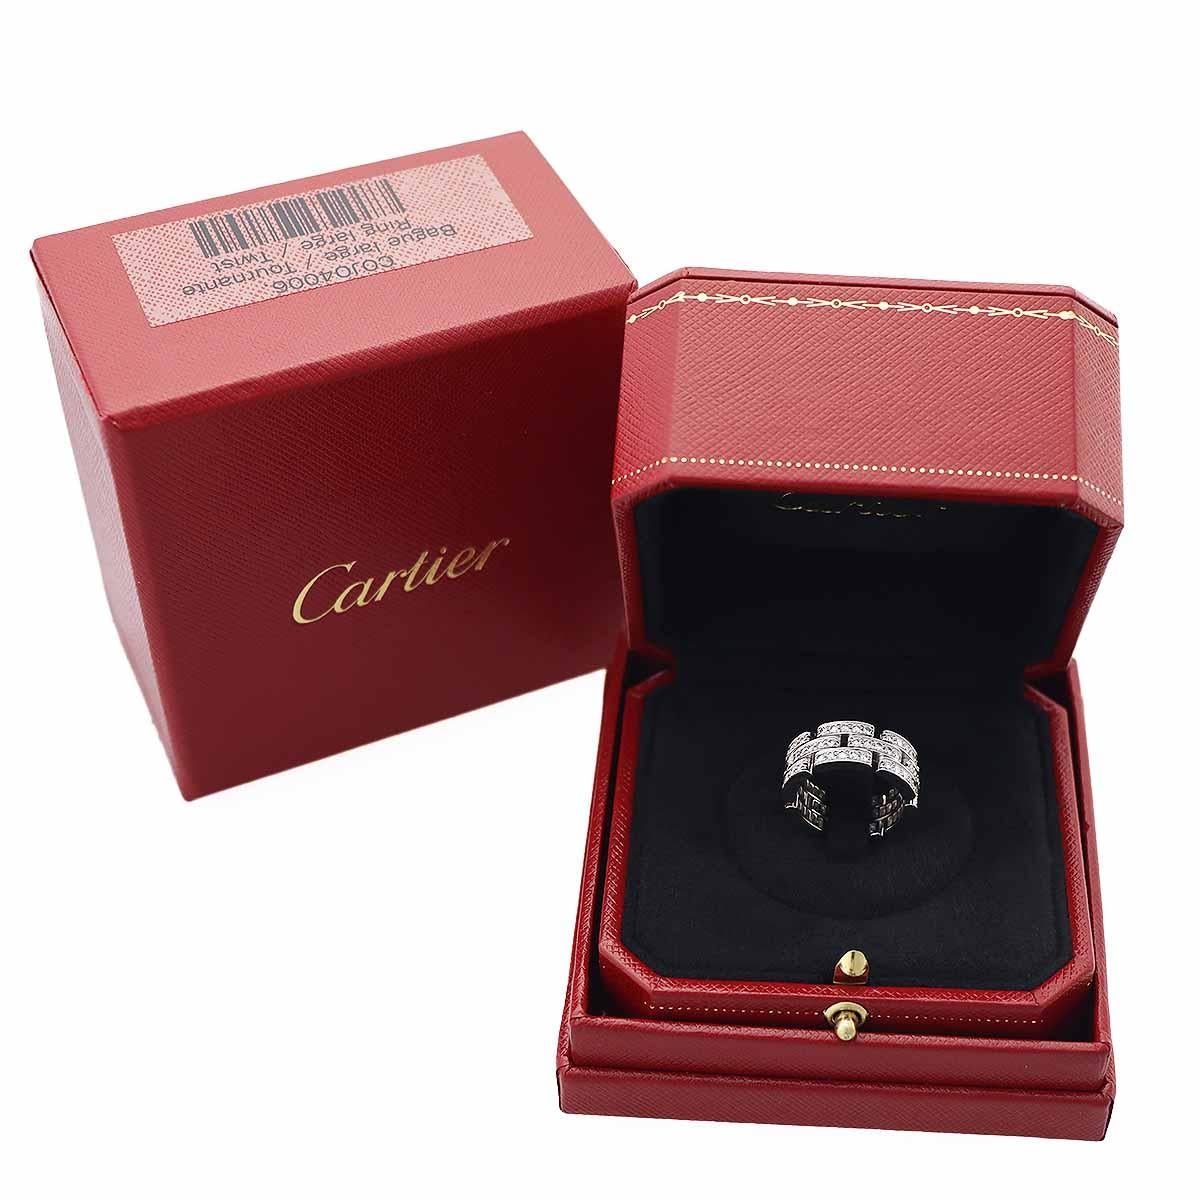 Women's Cartier 18Karat White Gold Full Diamond Maillon Panthere 3-Row Ring US size 6 For Sale